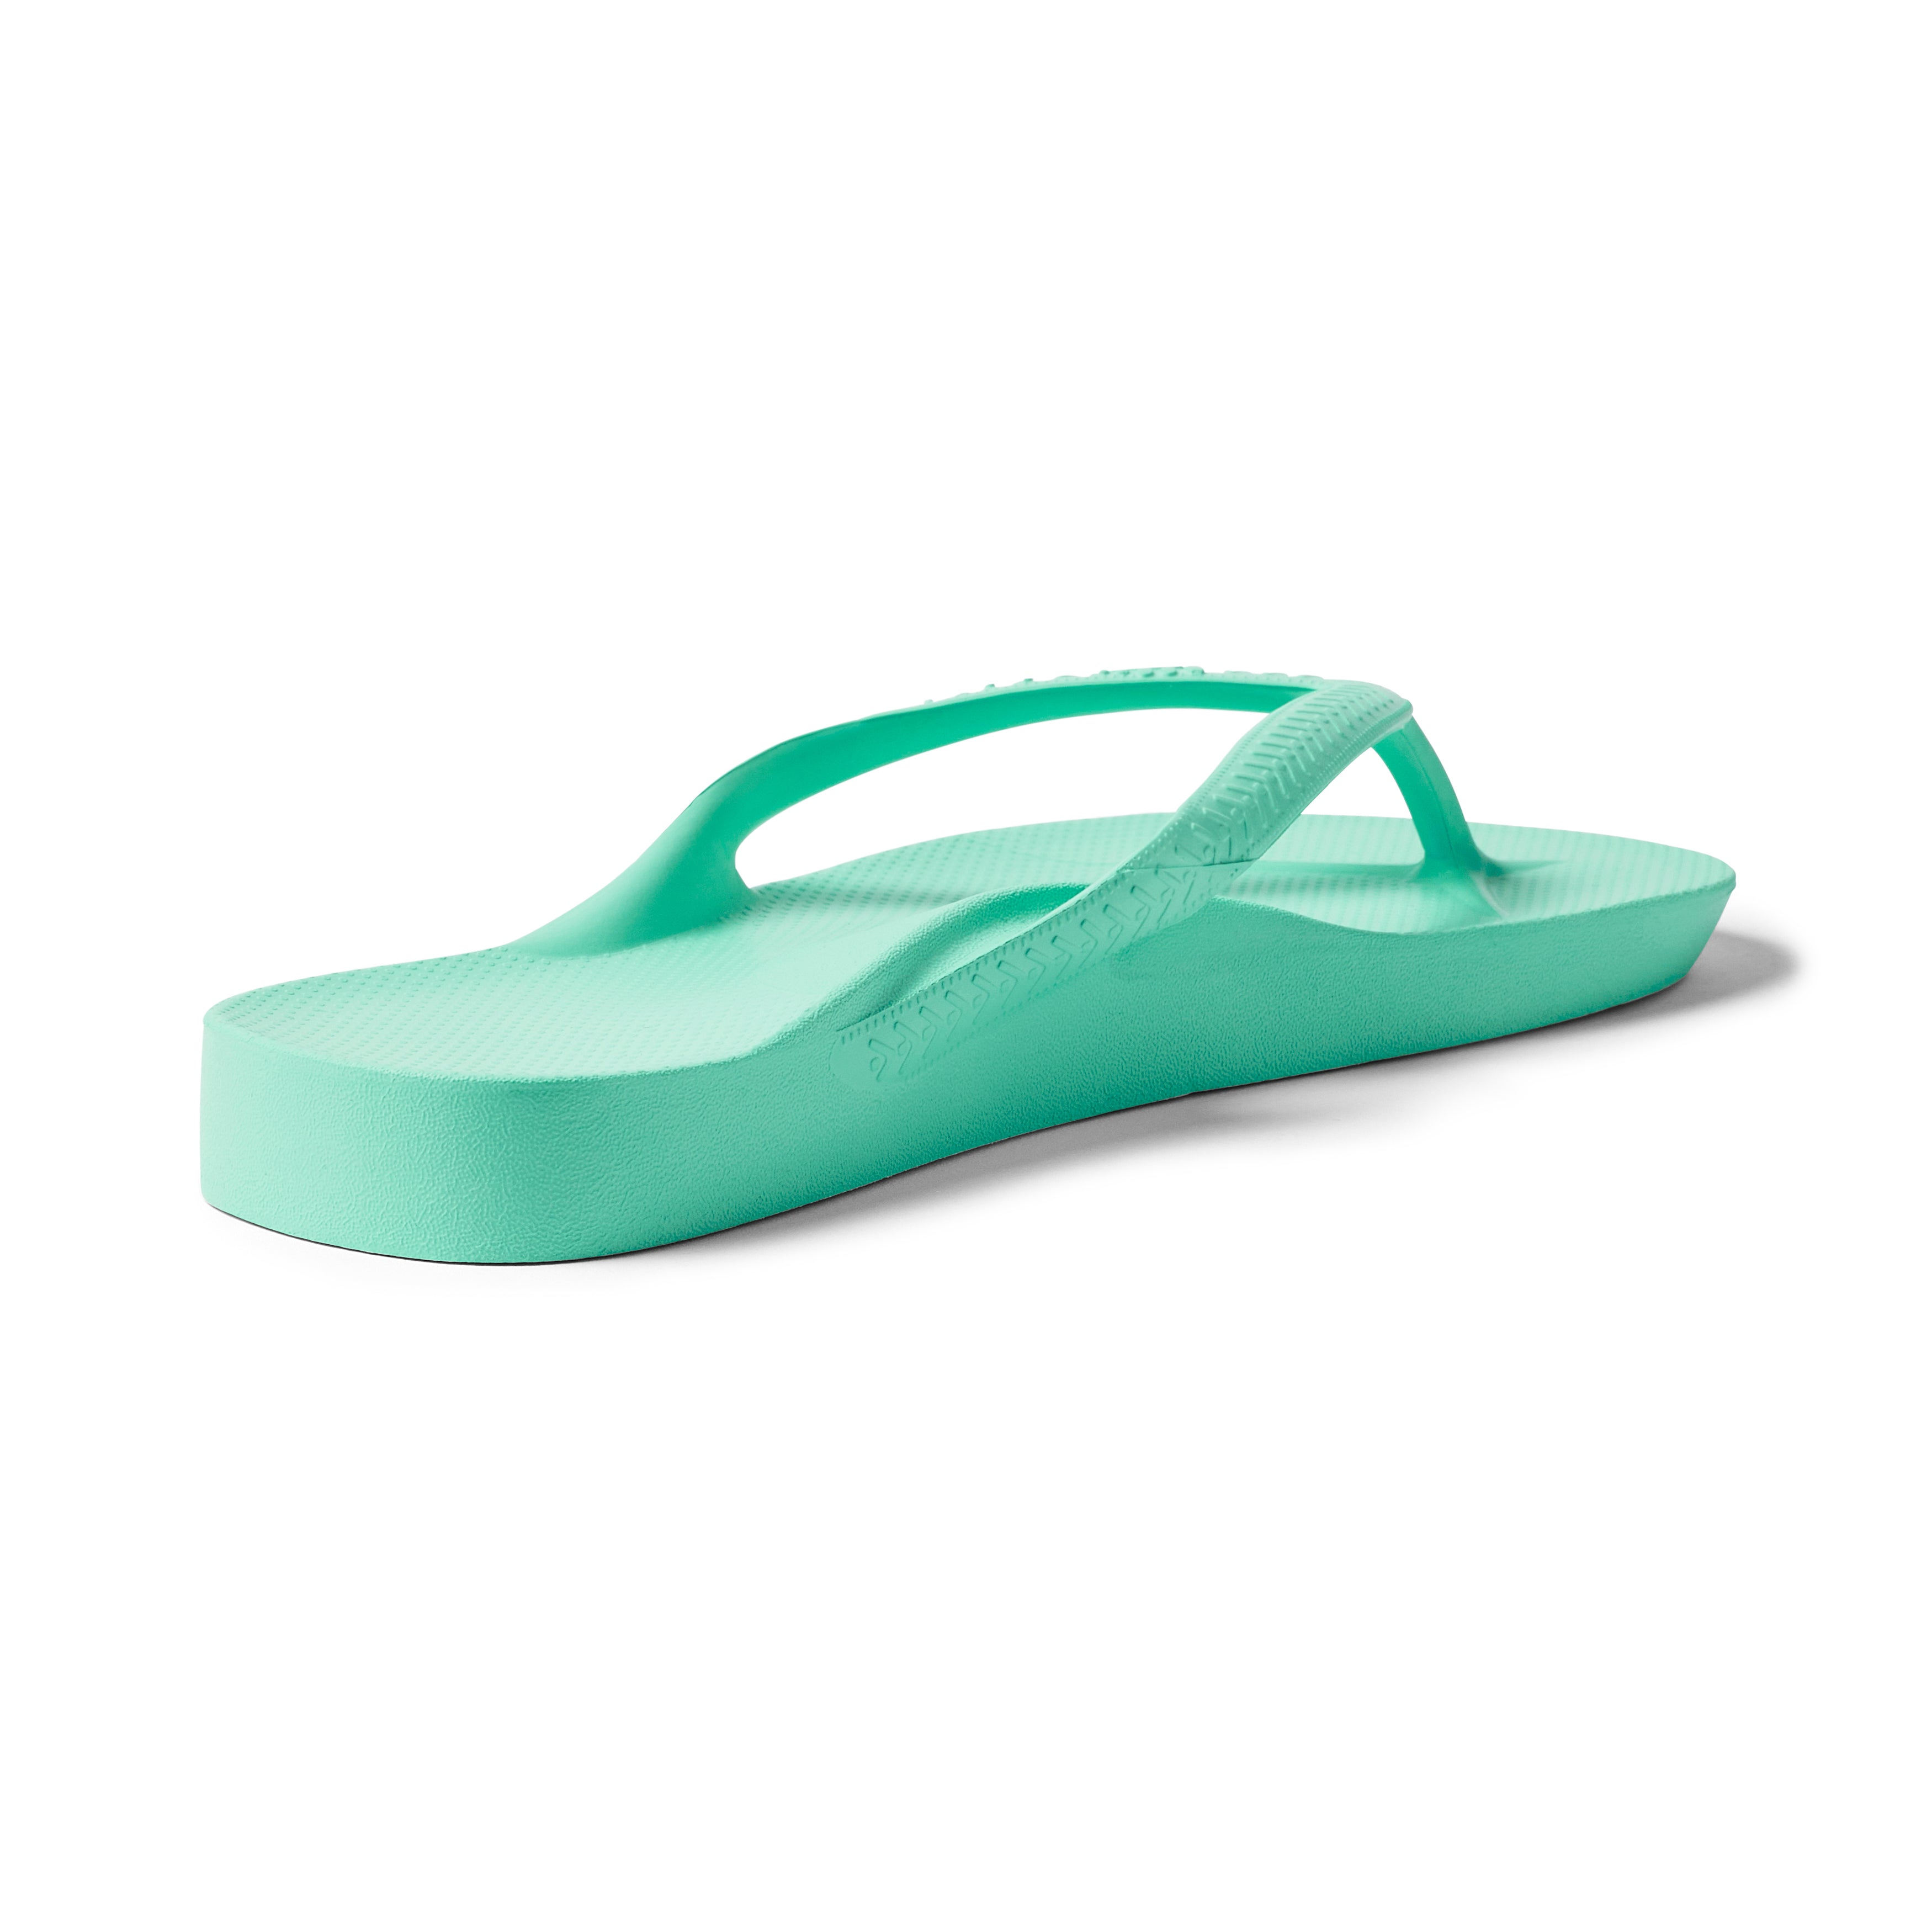 Revolutionary Orthopaedic Flip Flops From Archies Footwear Debuts in  Singapore - Asia 361